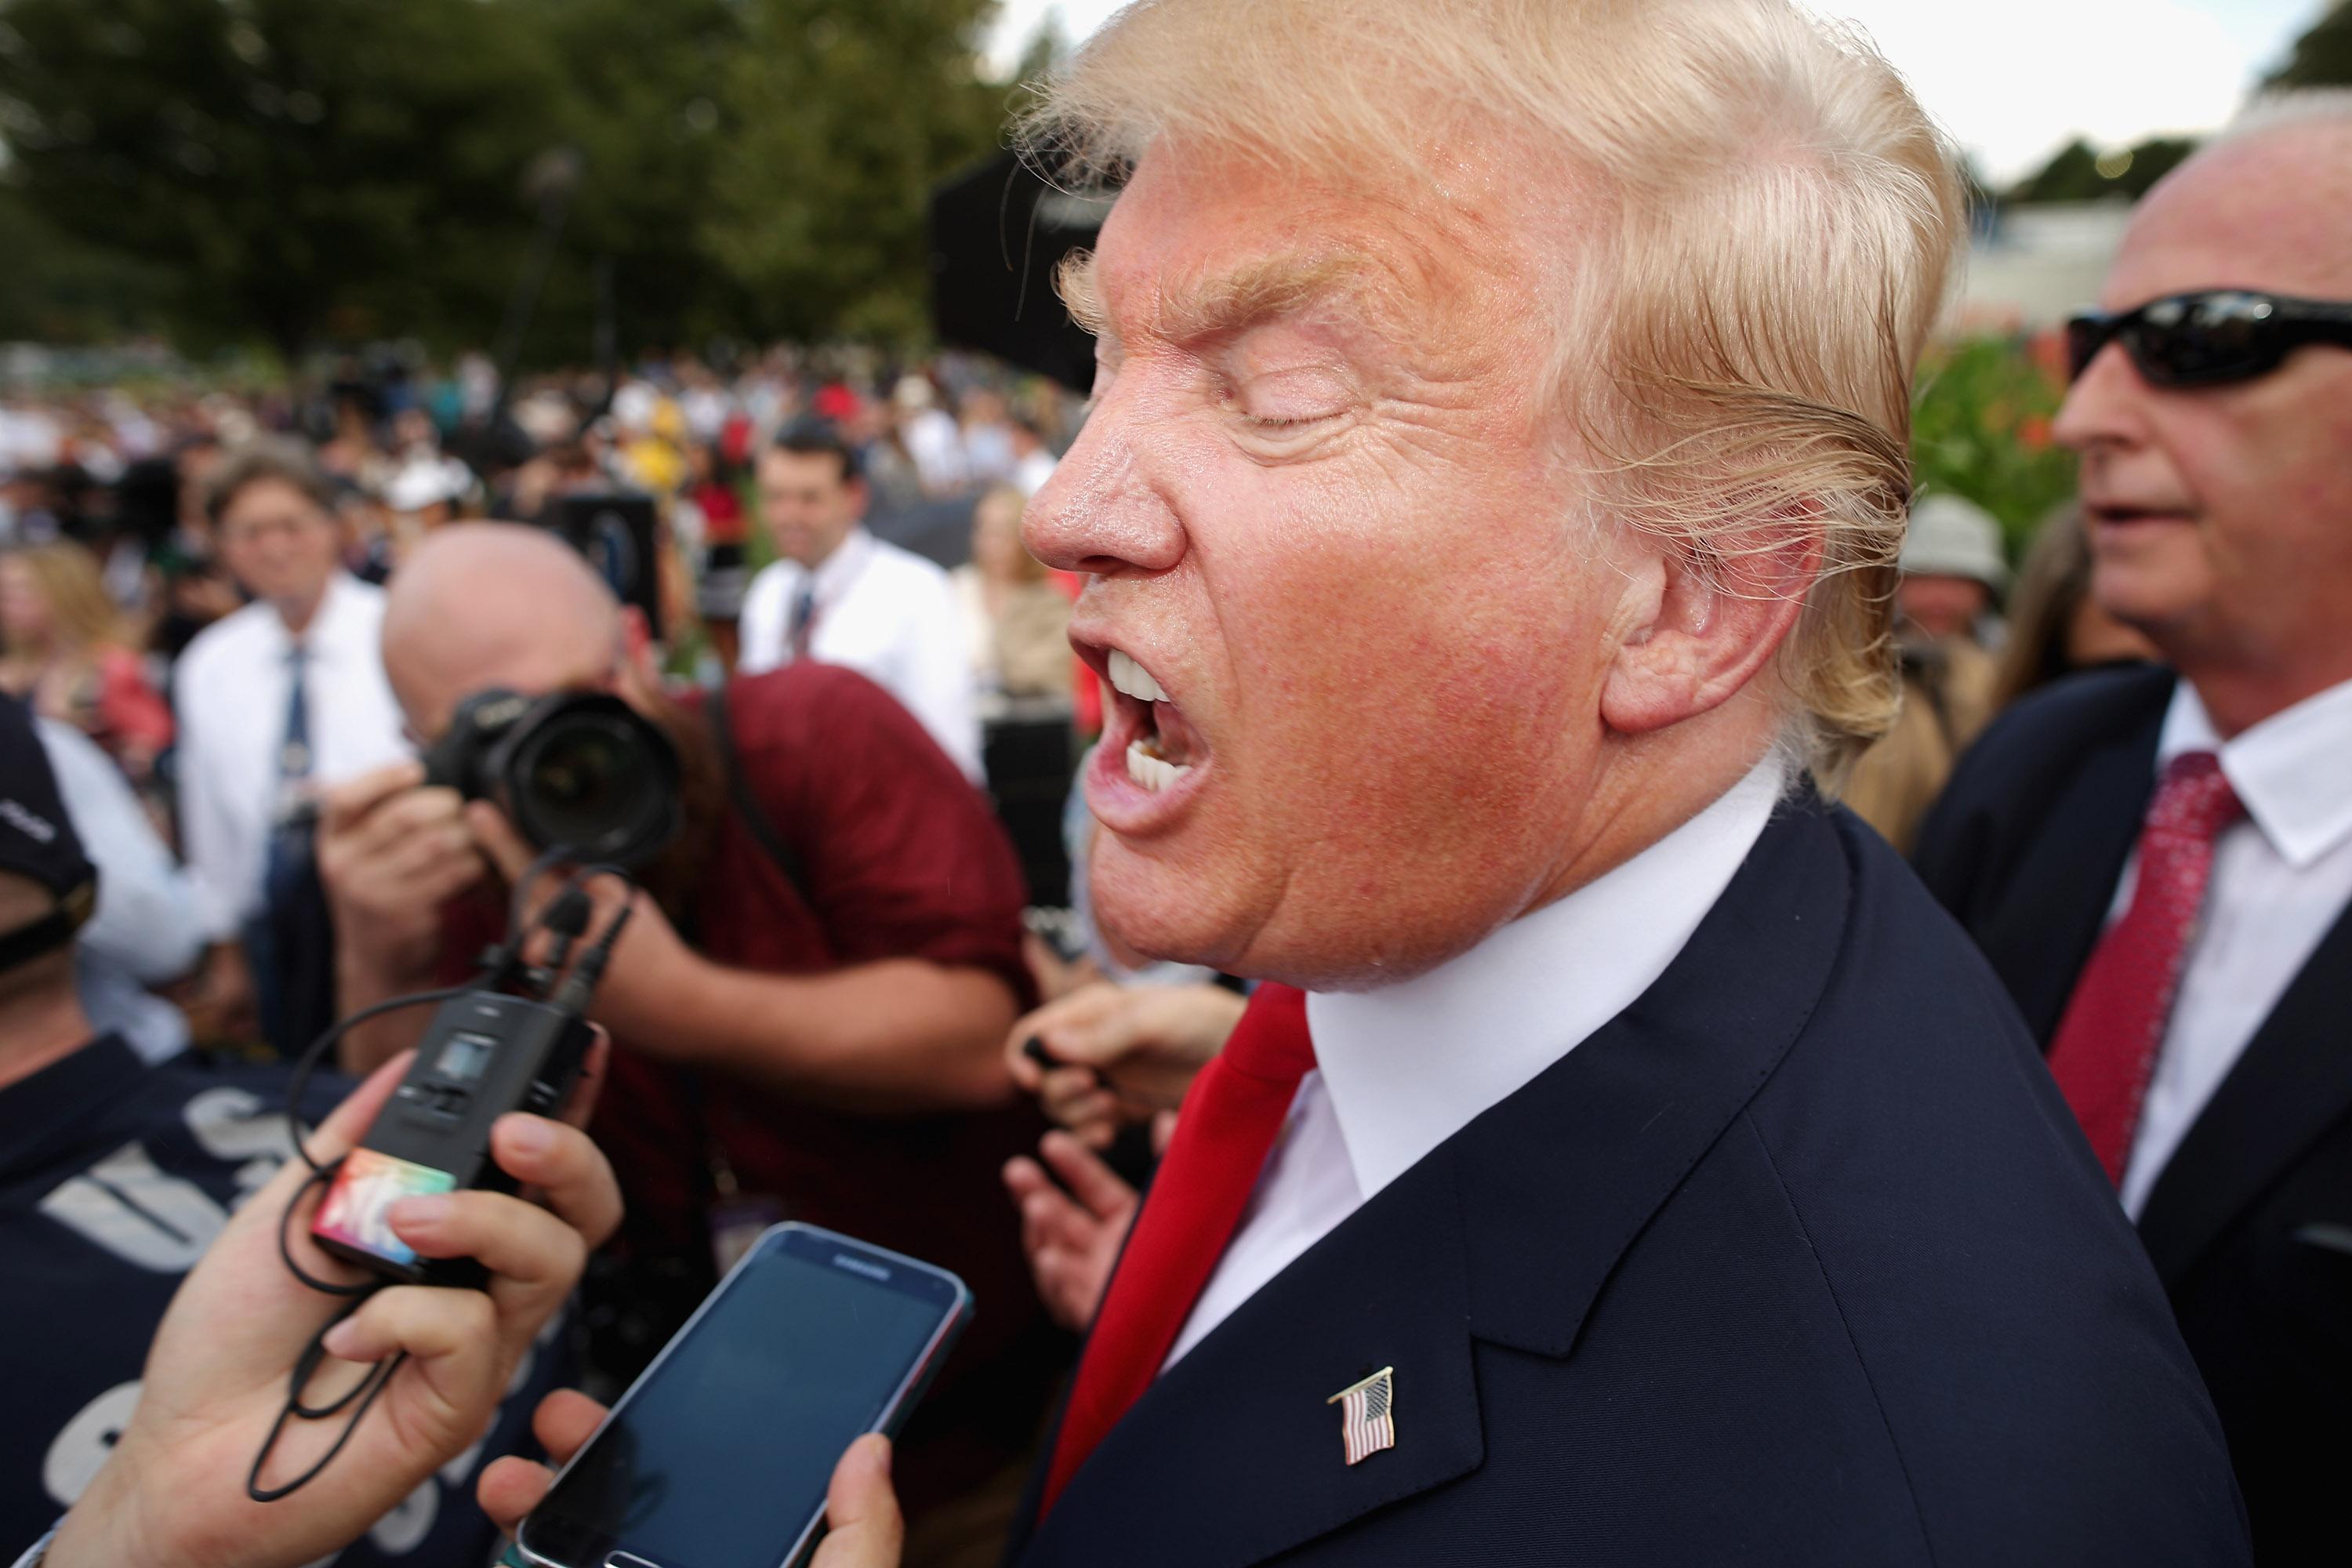 Donald Trump, surrounded by a crowd of people, yells into a voice recorder.